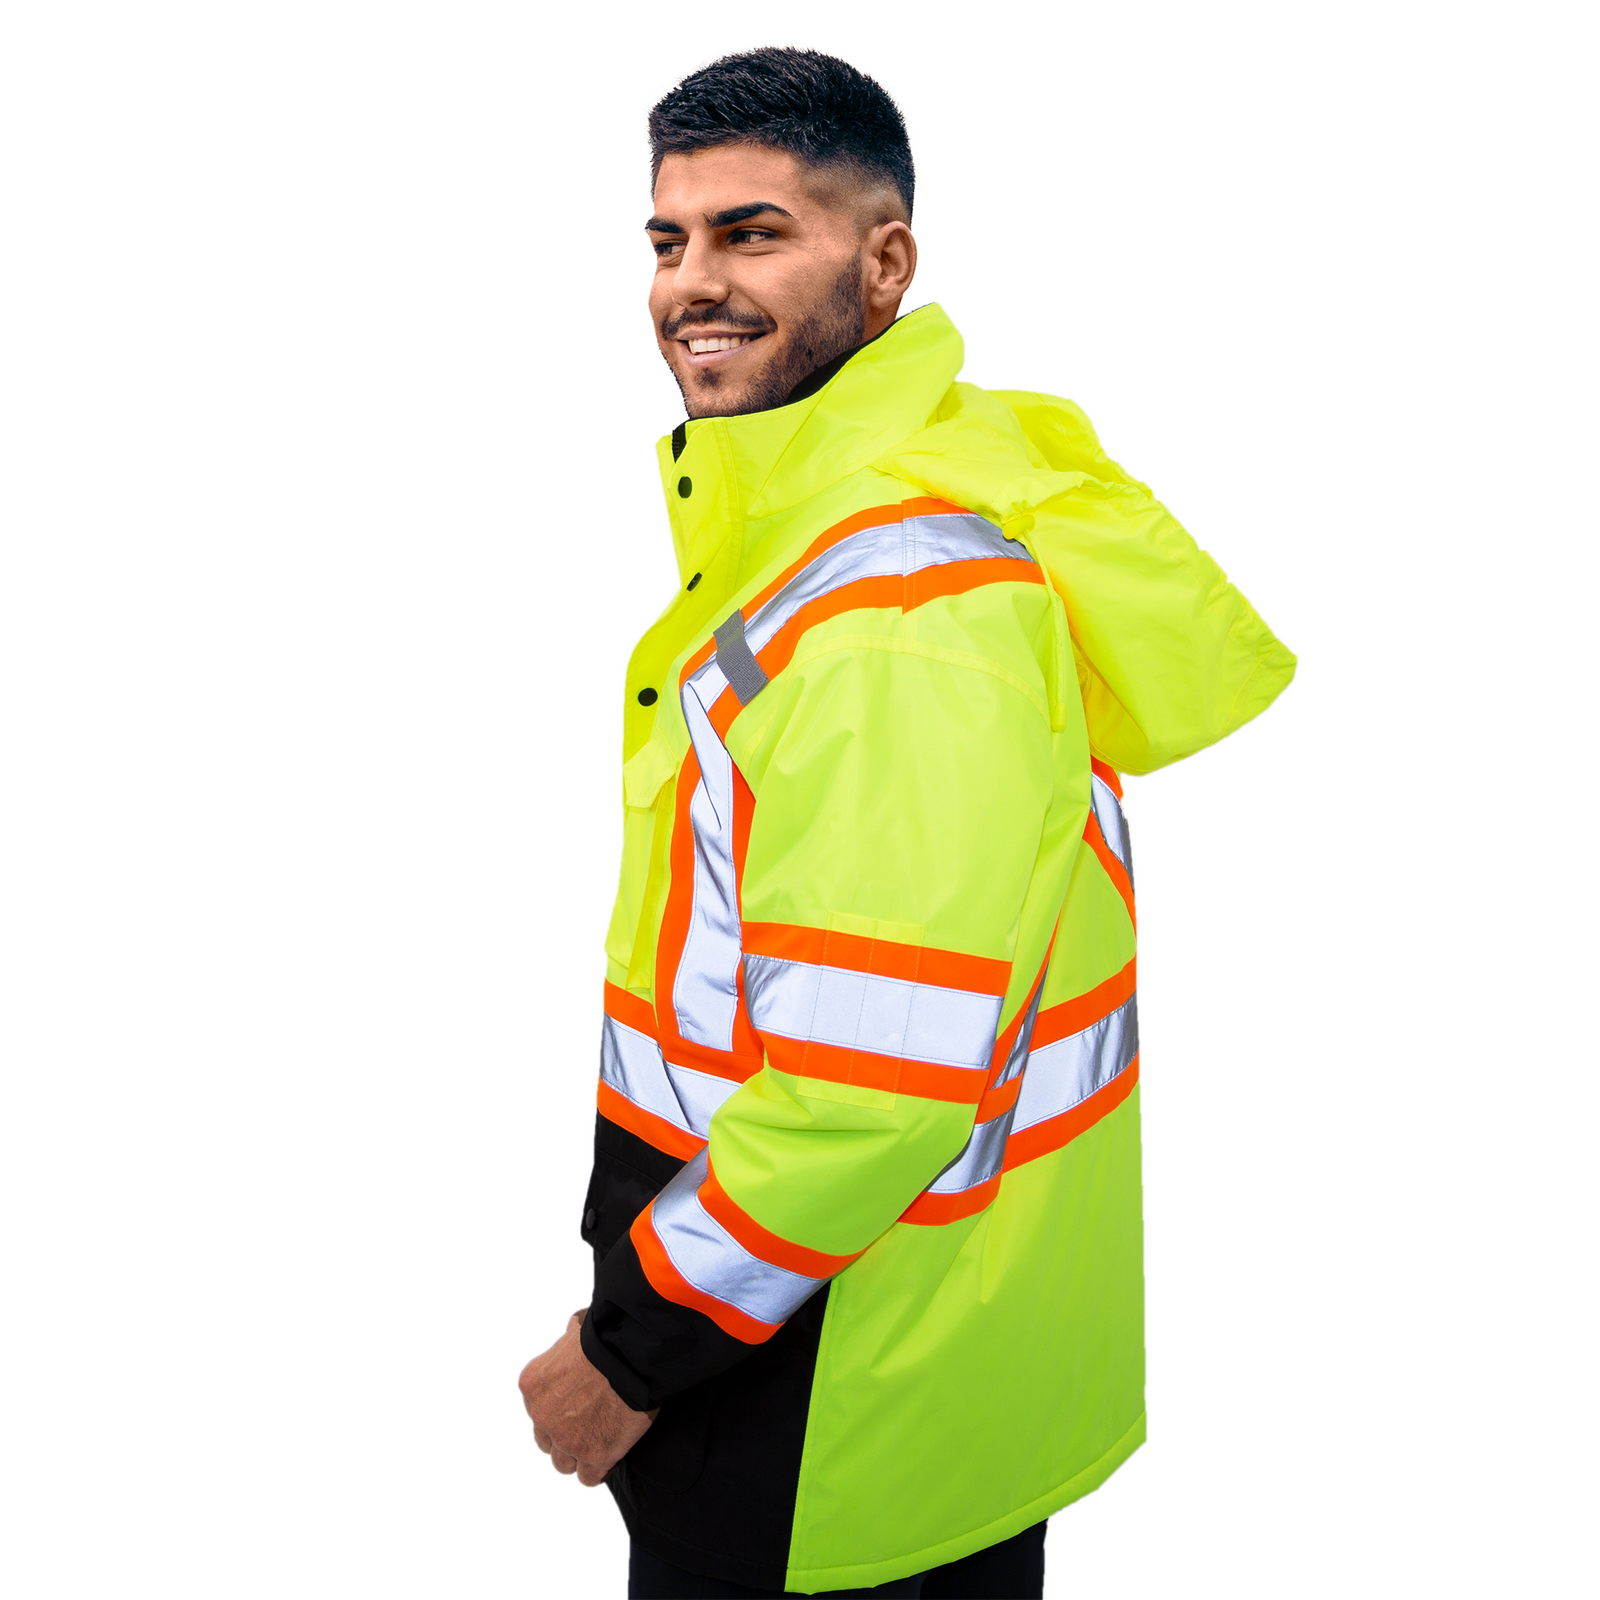 Man wearing the hi vis two tone safety jacket for work